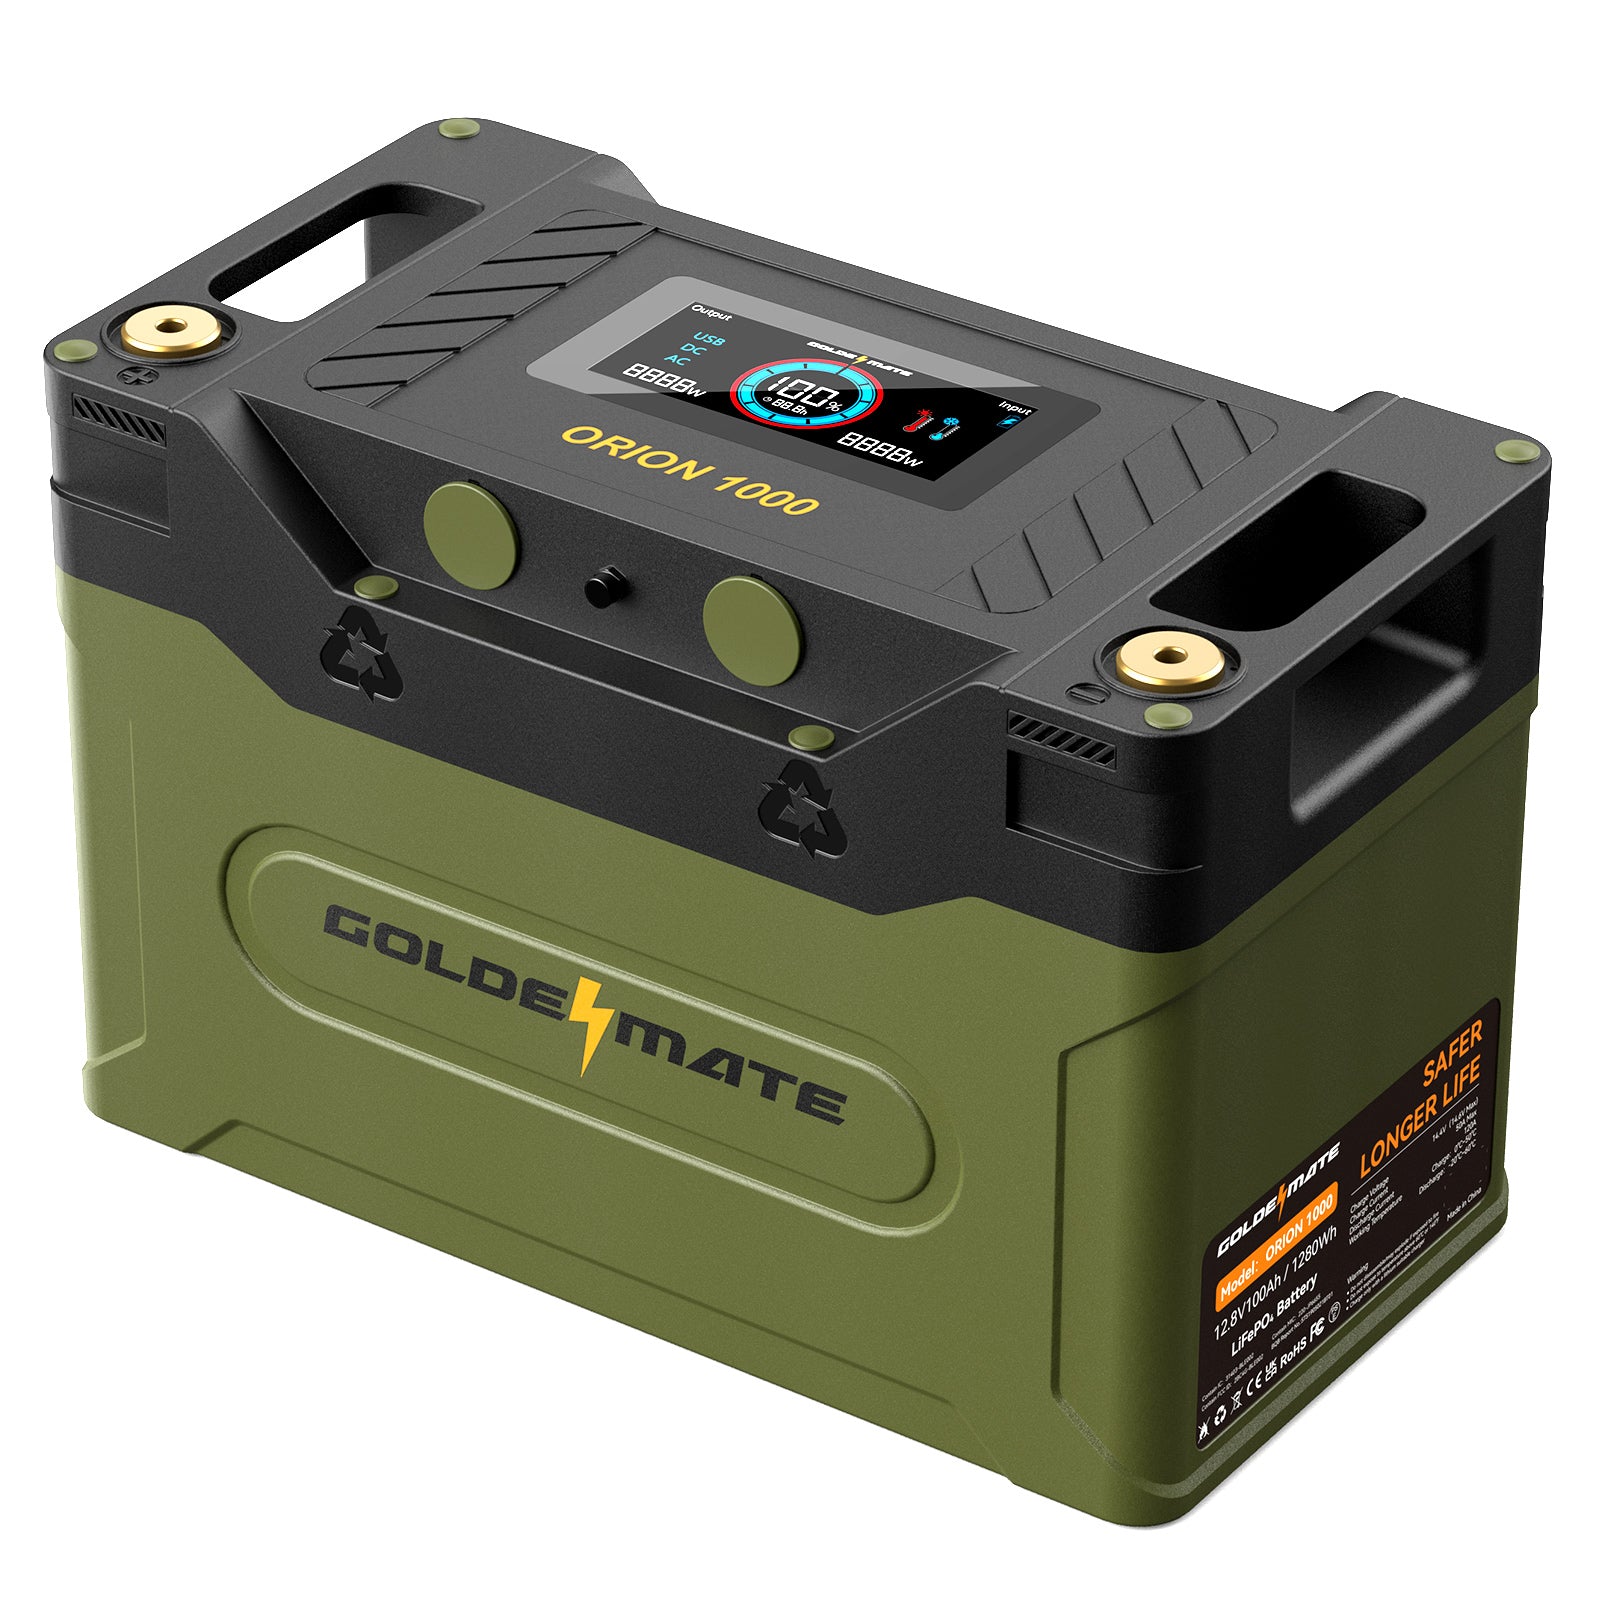 ⚡【72-Hour Best Price】GoldenMate Orion1000 Smart 12V 100Ah Group 31 Deep Cycle LiFePO4 Battery with LCD Display & APP Monitoring